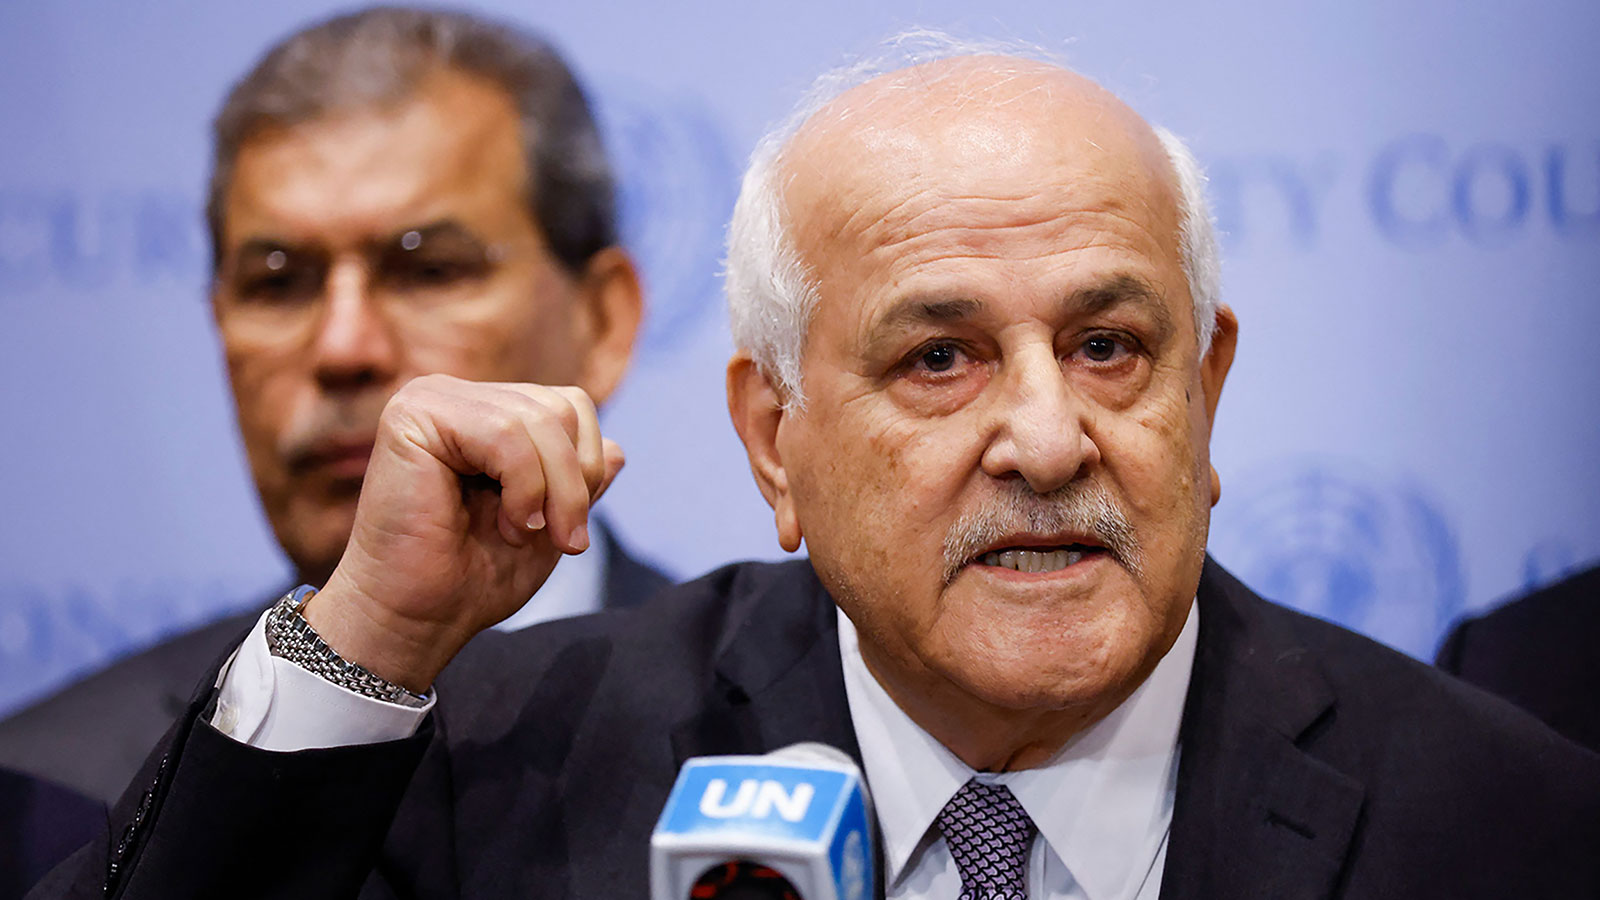 Riyad H. Mansour, Ambassador of the Permanent Observer Mission of the State of Palestine to the United Nations speaks during a stakeout before a Security Council meeting at the UN headquarters in New York City on October 13.